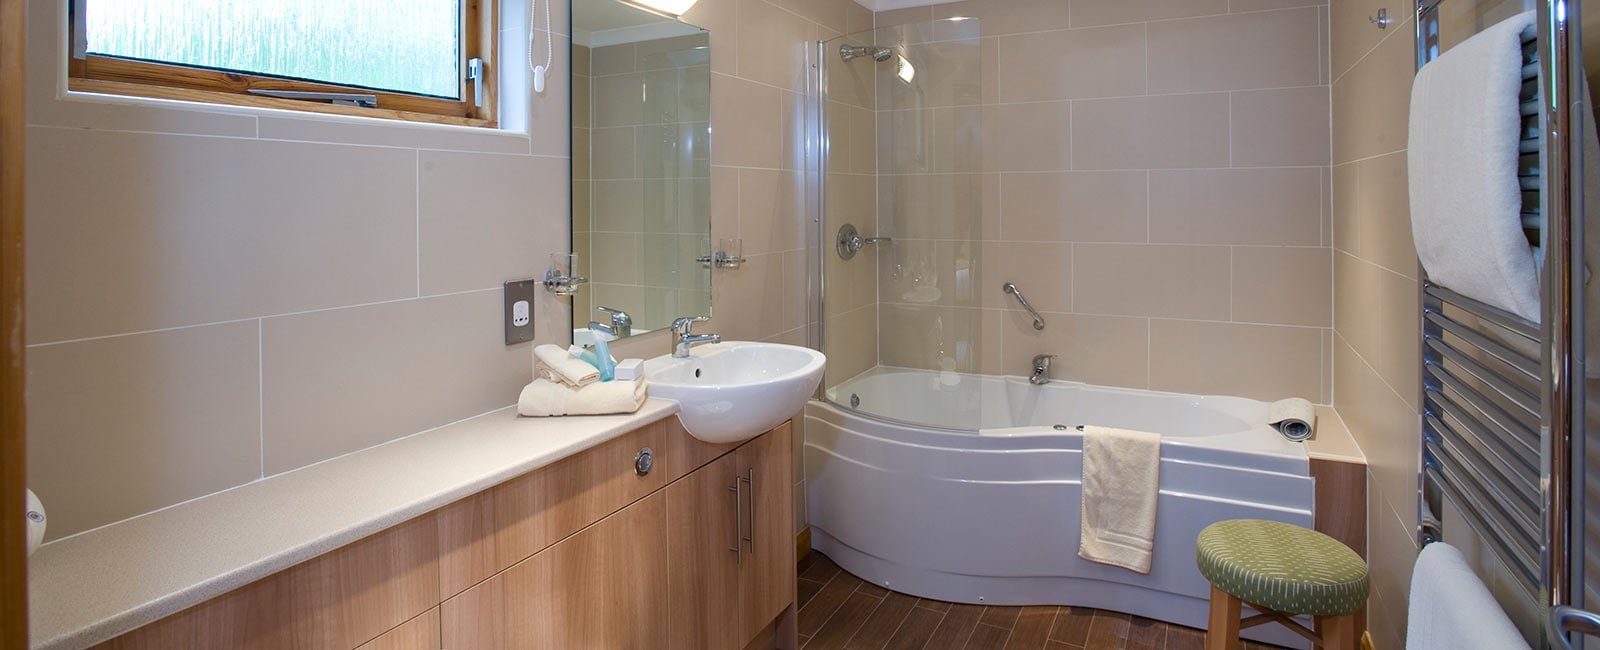 Bathroom at Craigendarroch Lodges, Managed by Hilton Grand Vacations in Royal Deeside, Scotland